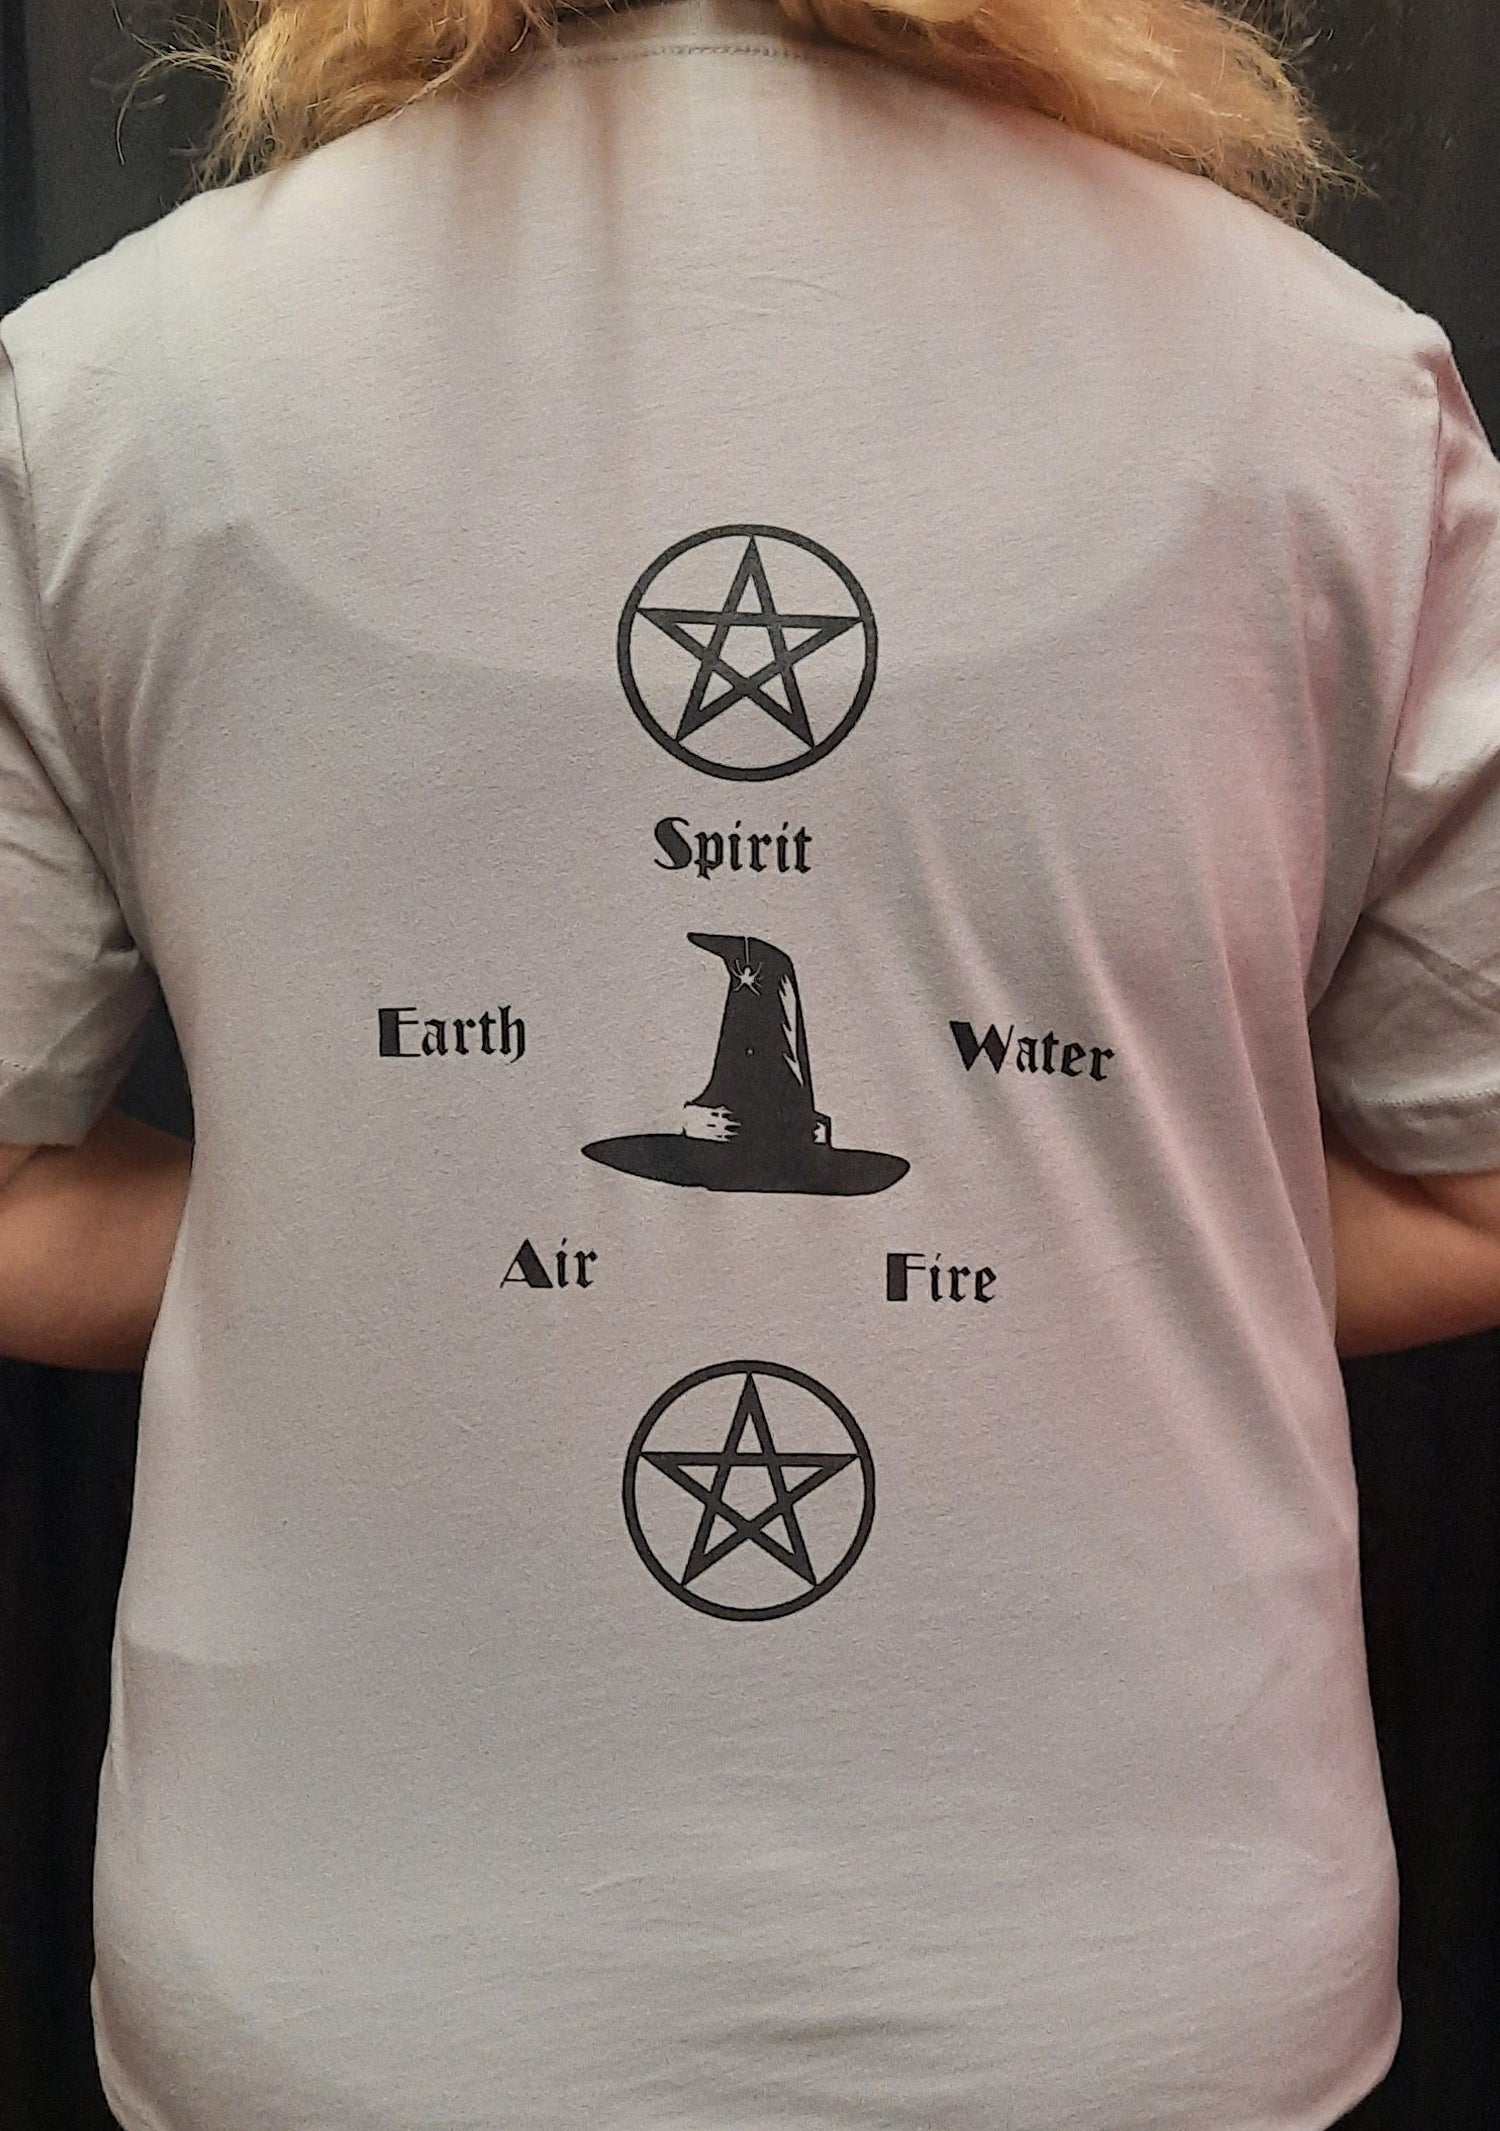 Bella Canvas short sleeve T-Shirt, size medium.  "Wiccan" design on front.  Earth, Air, Fire, Water, Spirit design on back.